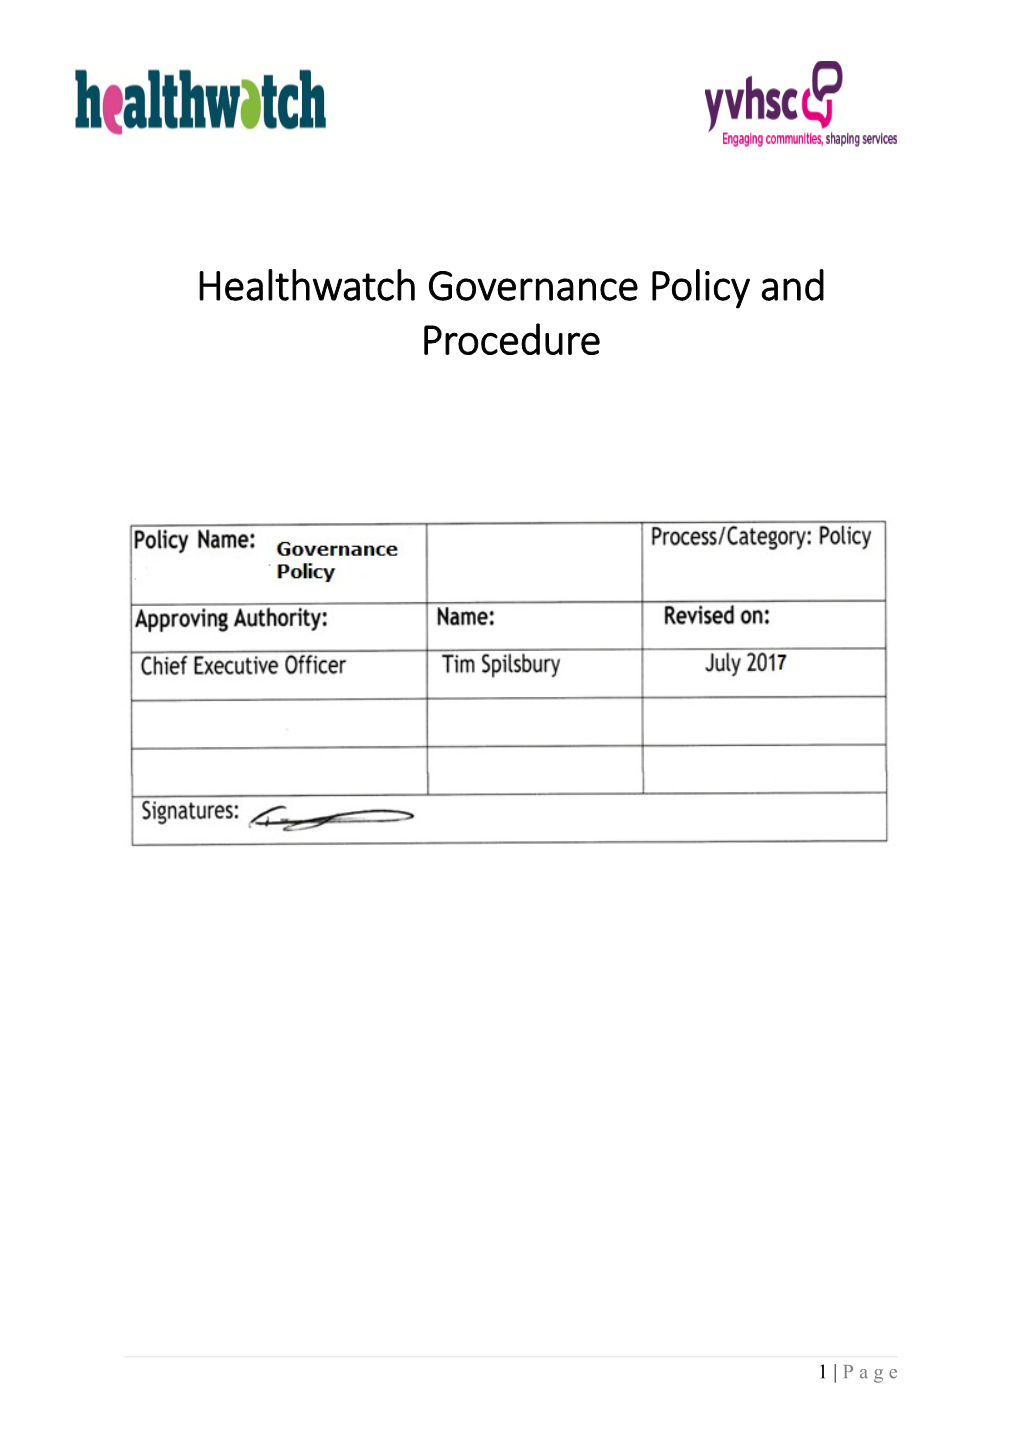 Healthwatch Governance Policy and Procedure